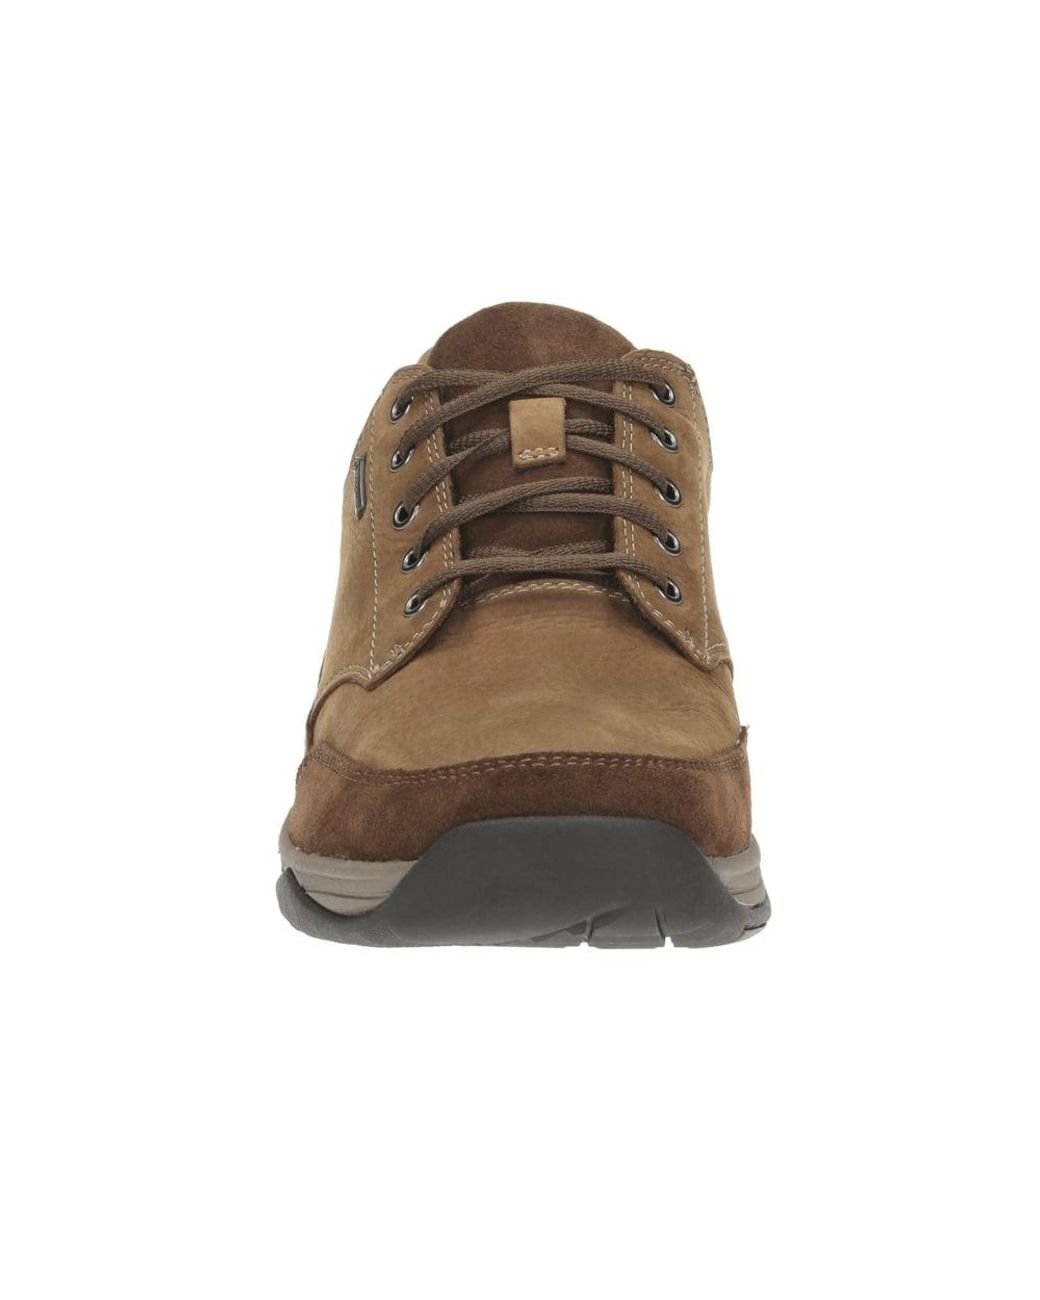 Clarks Leather Baystone Go Gtx Mens Casual Shoes in Tobacco Nubuck (Brown)  for Men | Lyst UK